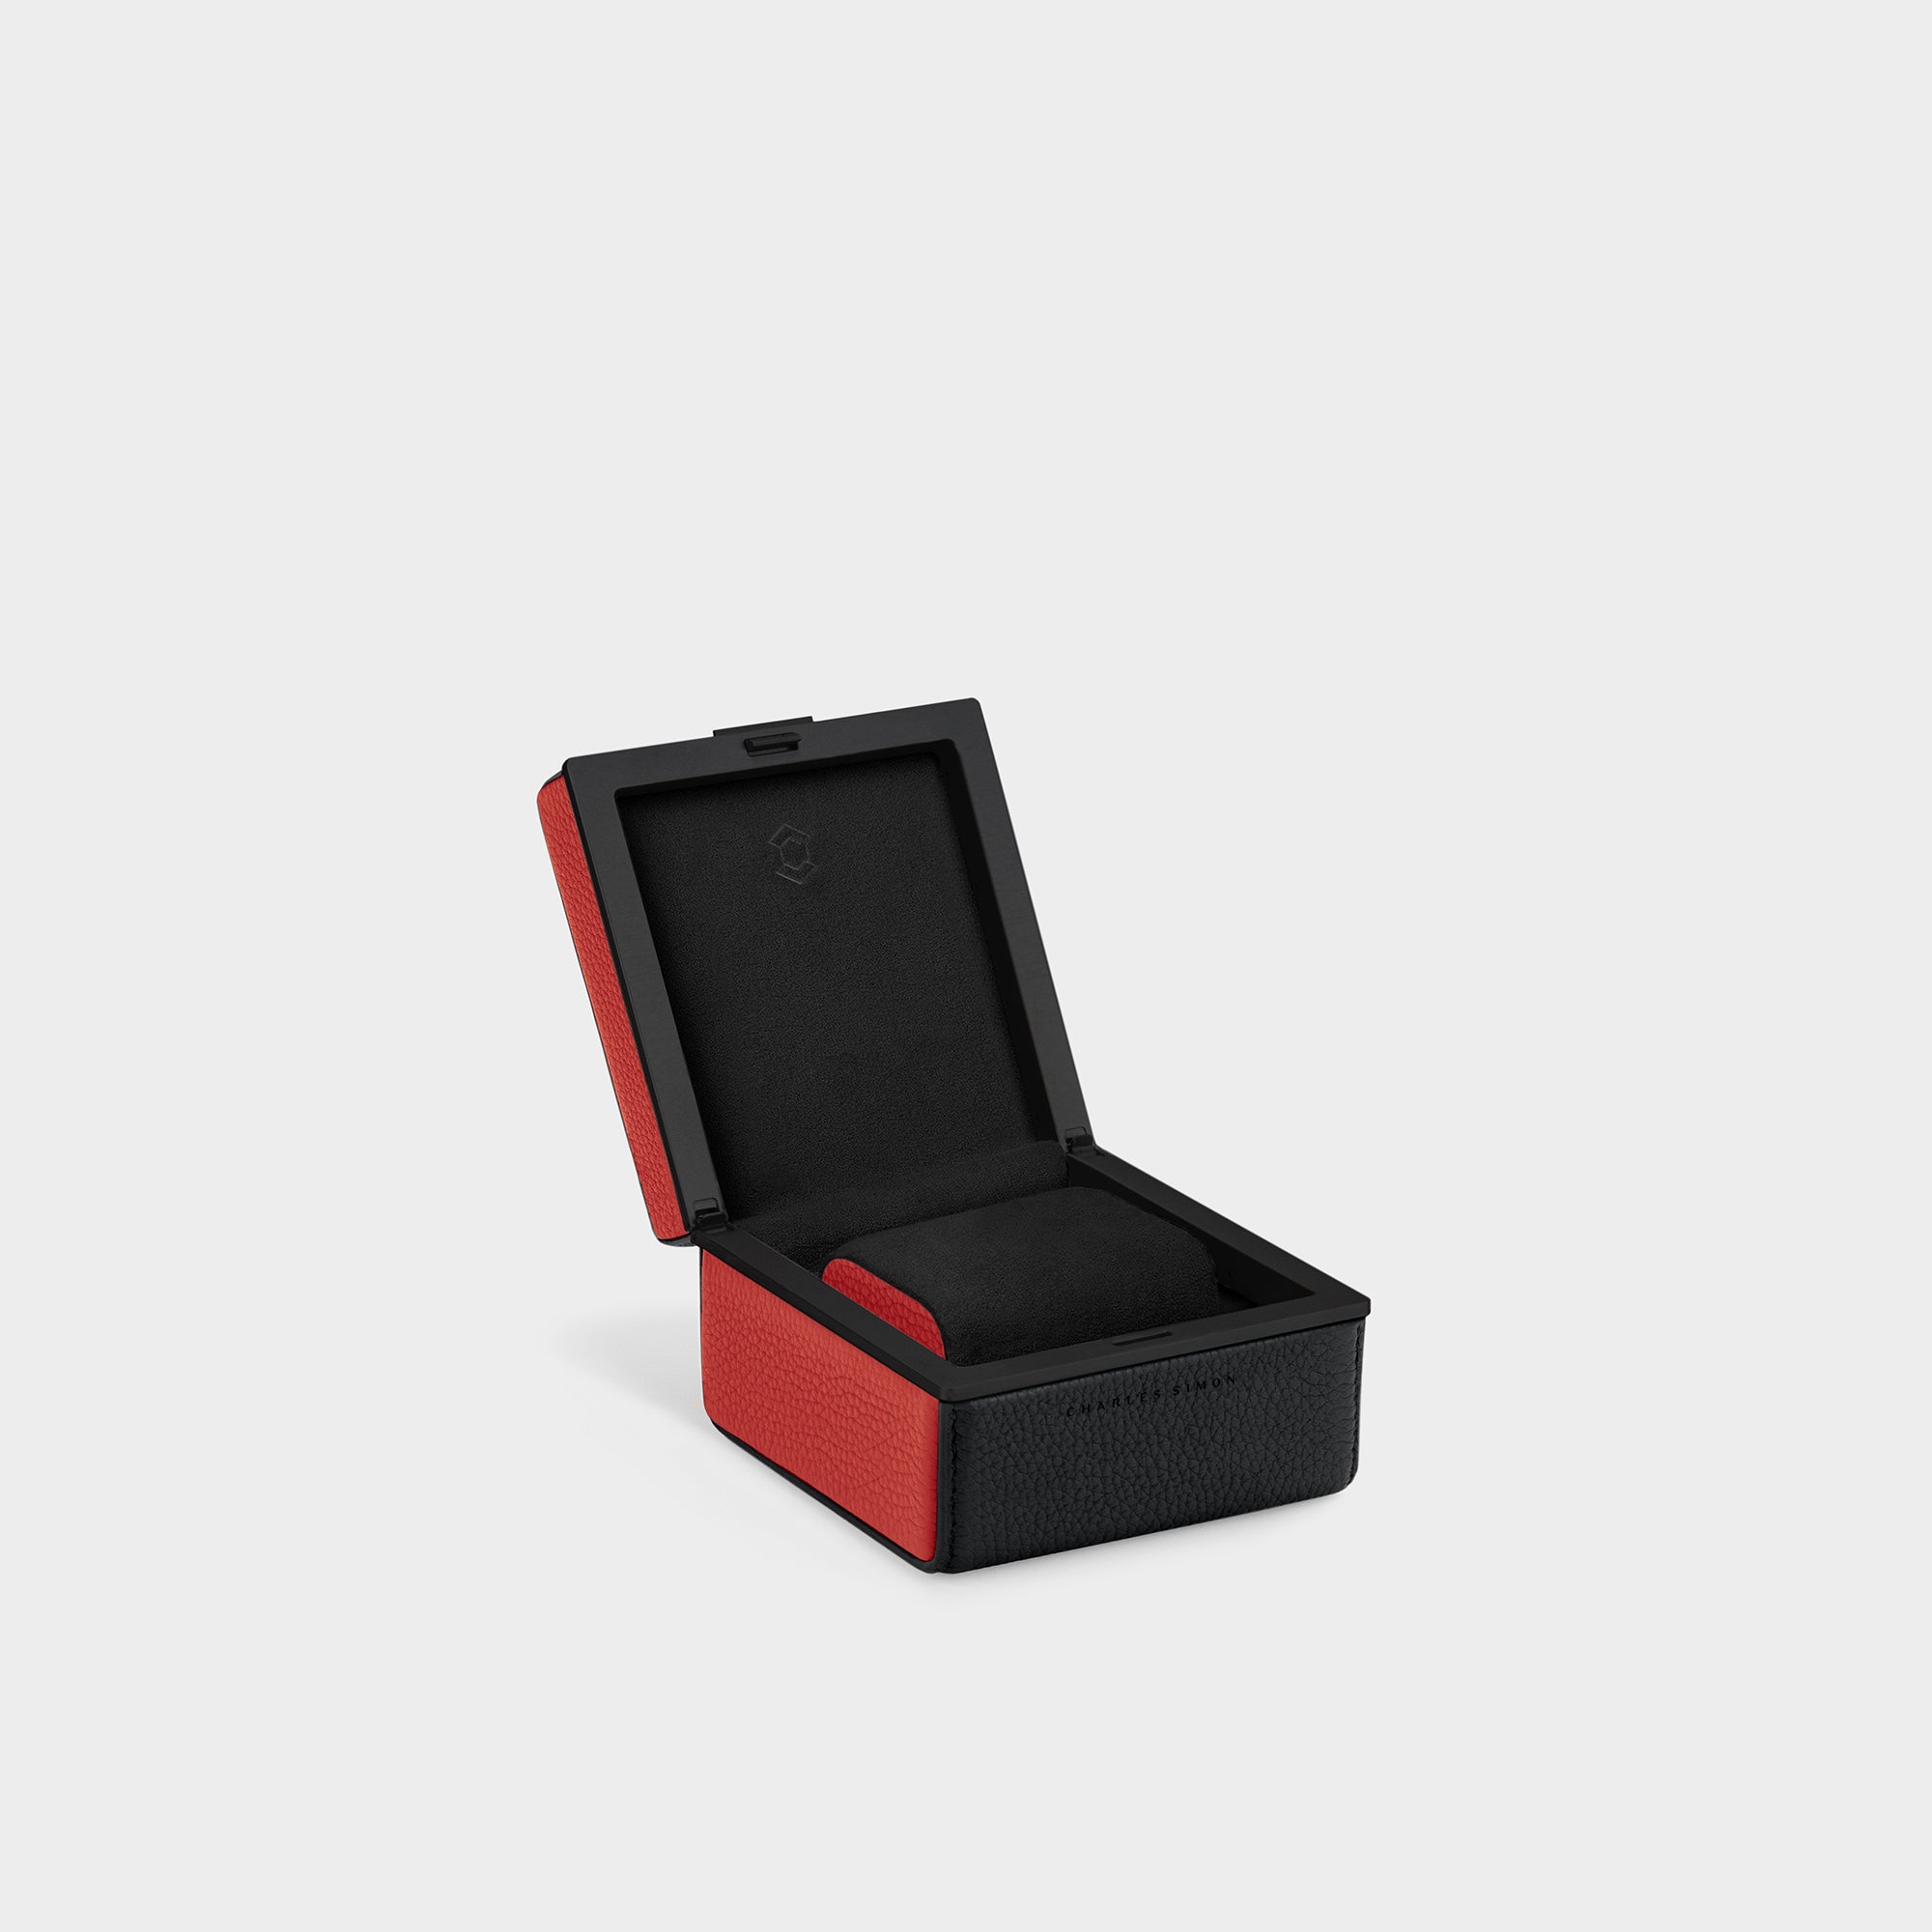 Eaton 1 watch case for 1 watch. Handmade from black French leather, anodized aluminum and Notte Alcantara interior with contrasting red leather accents